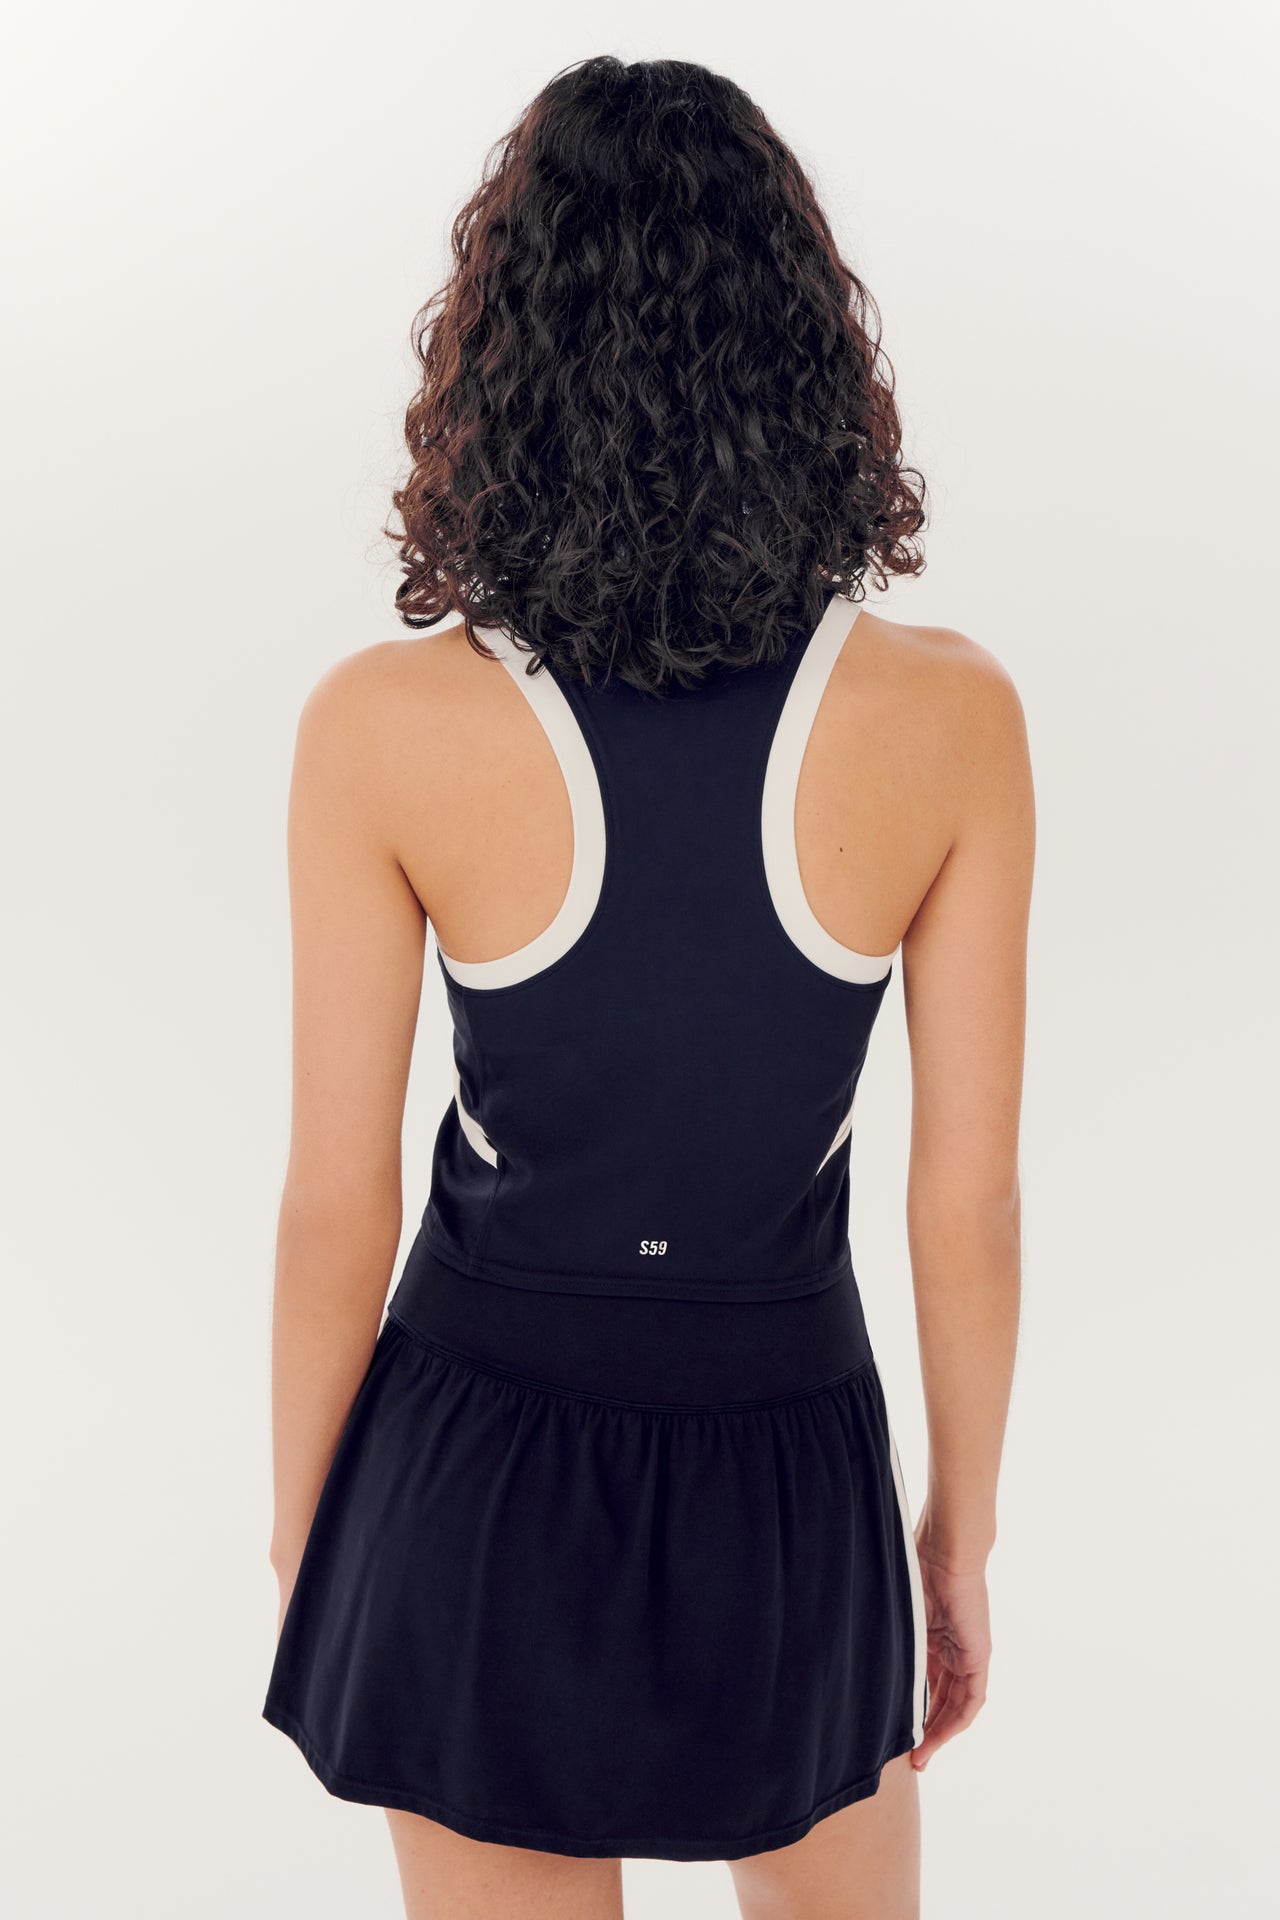 Woman from behind wearing a SPLITS59 Austin Airweight Crop Polo in Indigo/White, made of nylon and spandex fabric, and a black skort.